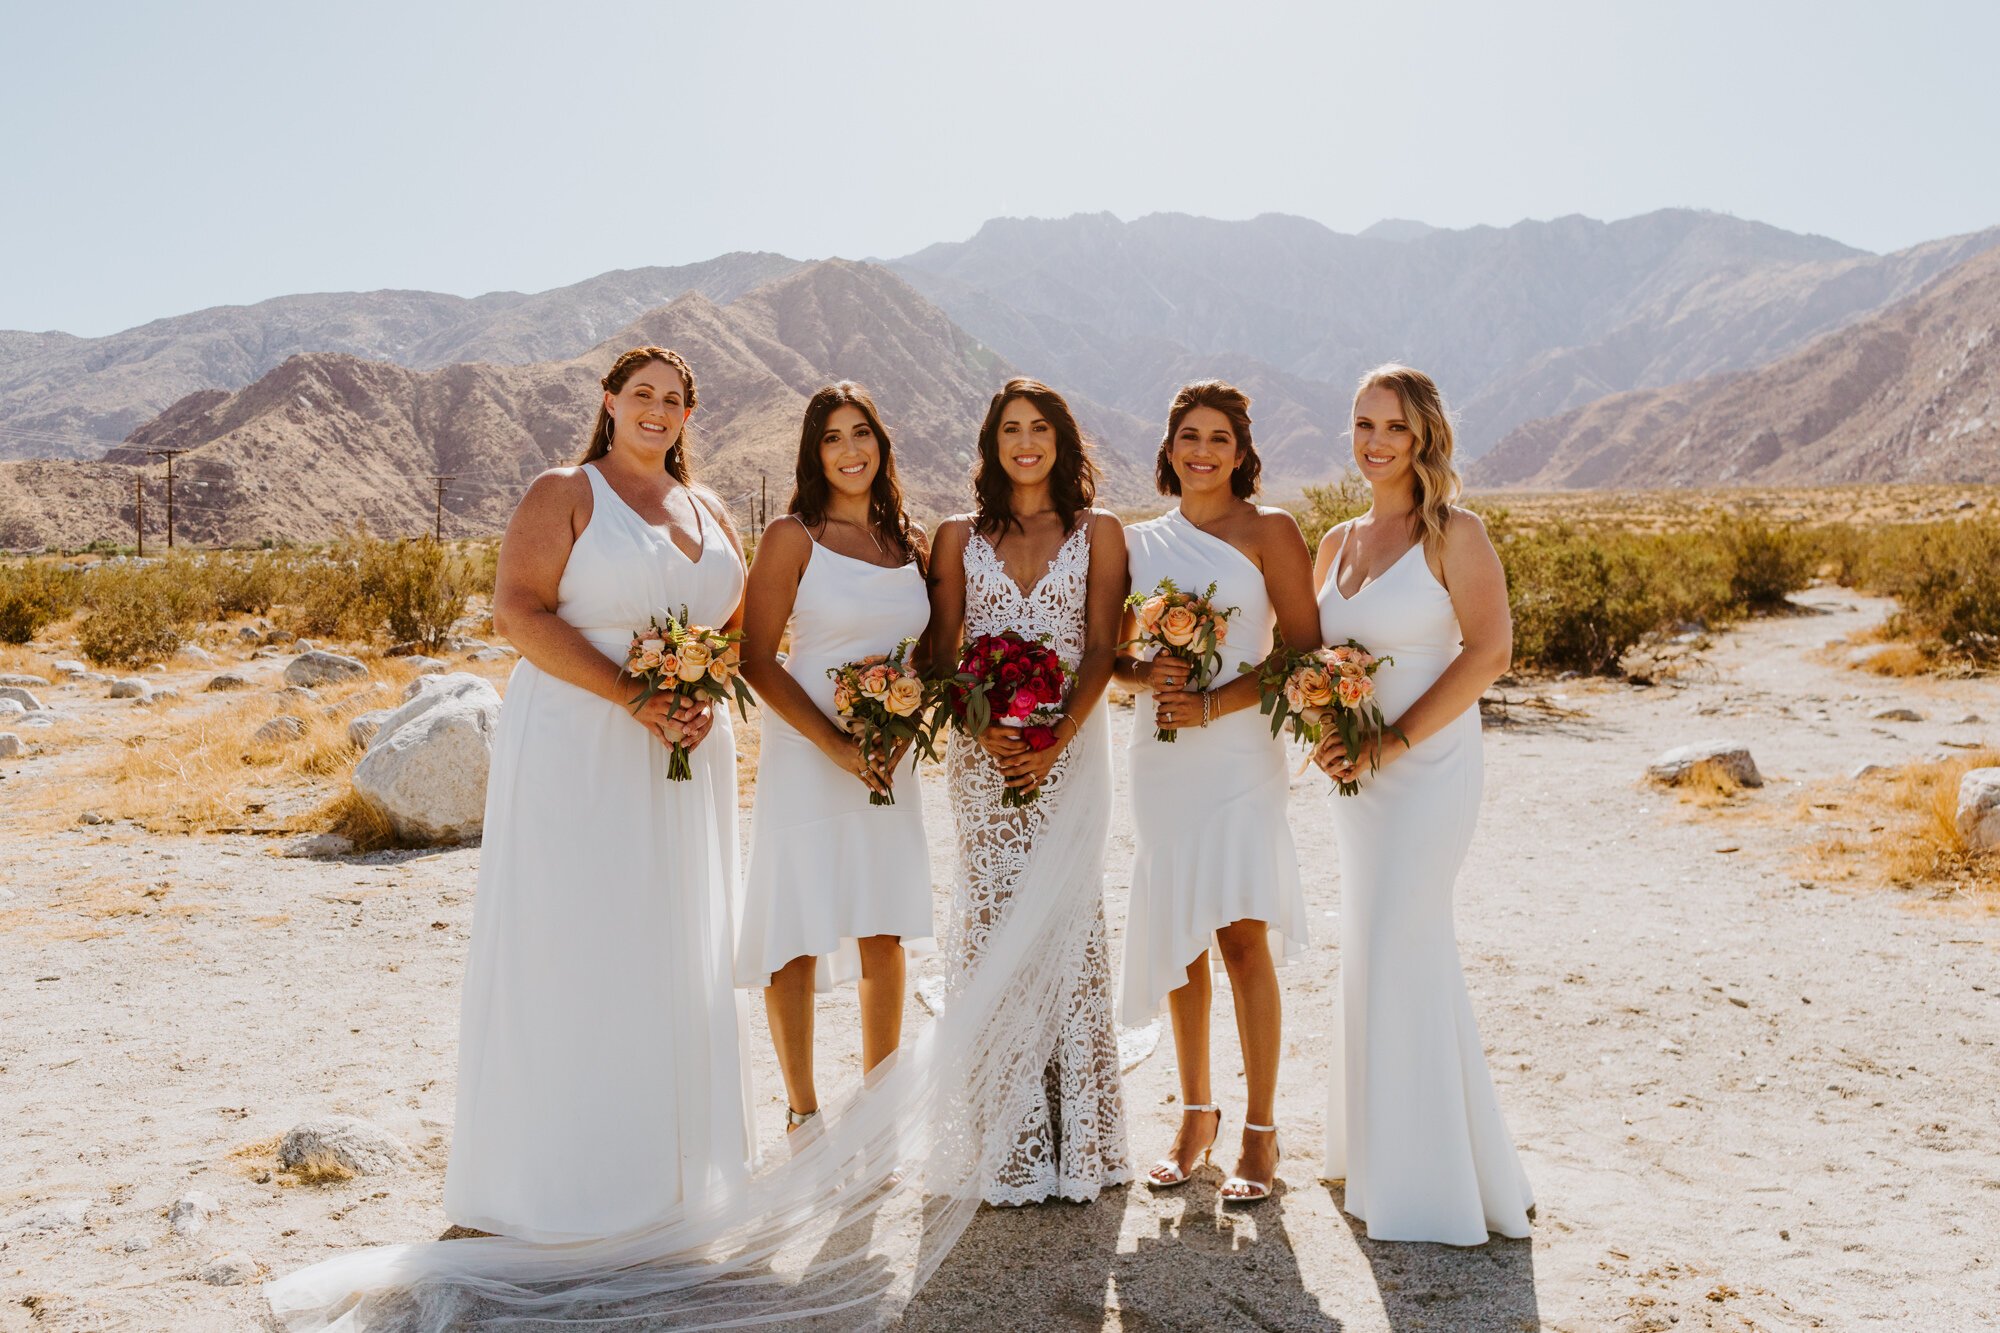 All white bridesmaid dress inspiration | Desert Palm Springs Bridesmaid Photo | Avalon Hotel and Bugalows | Palm Springs Wedding Photographer | Tida Svy Photography | www.tidasvy.com